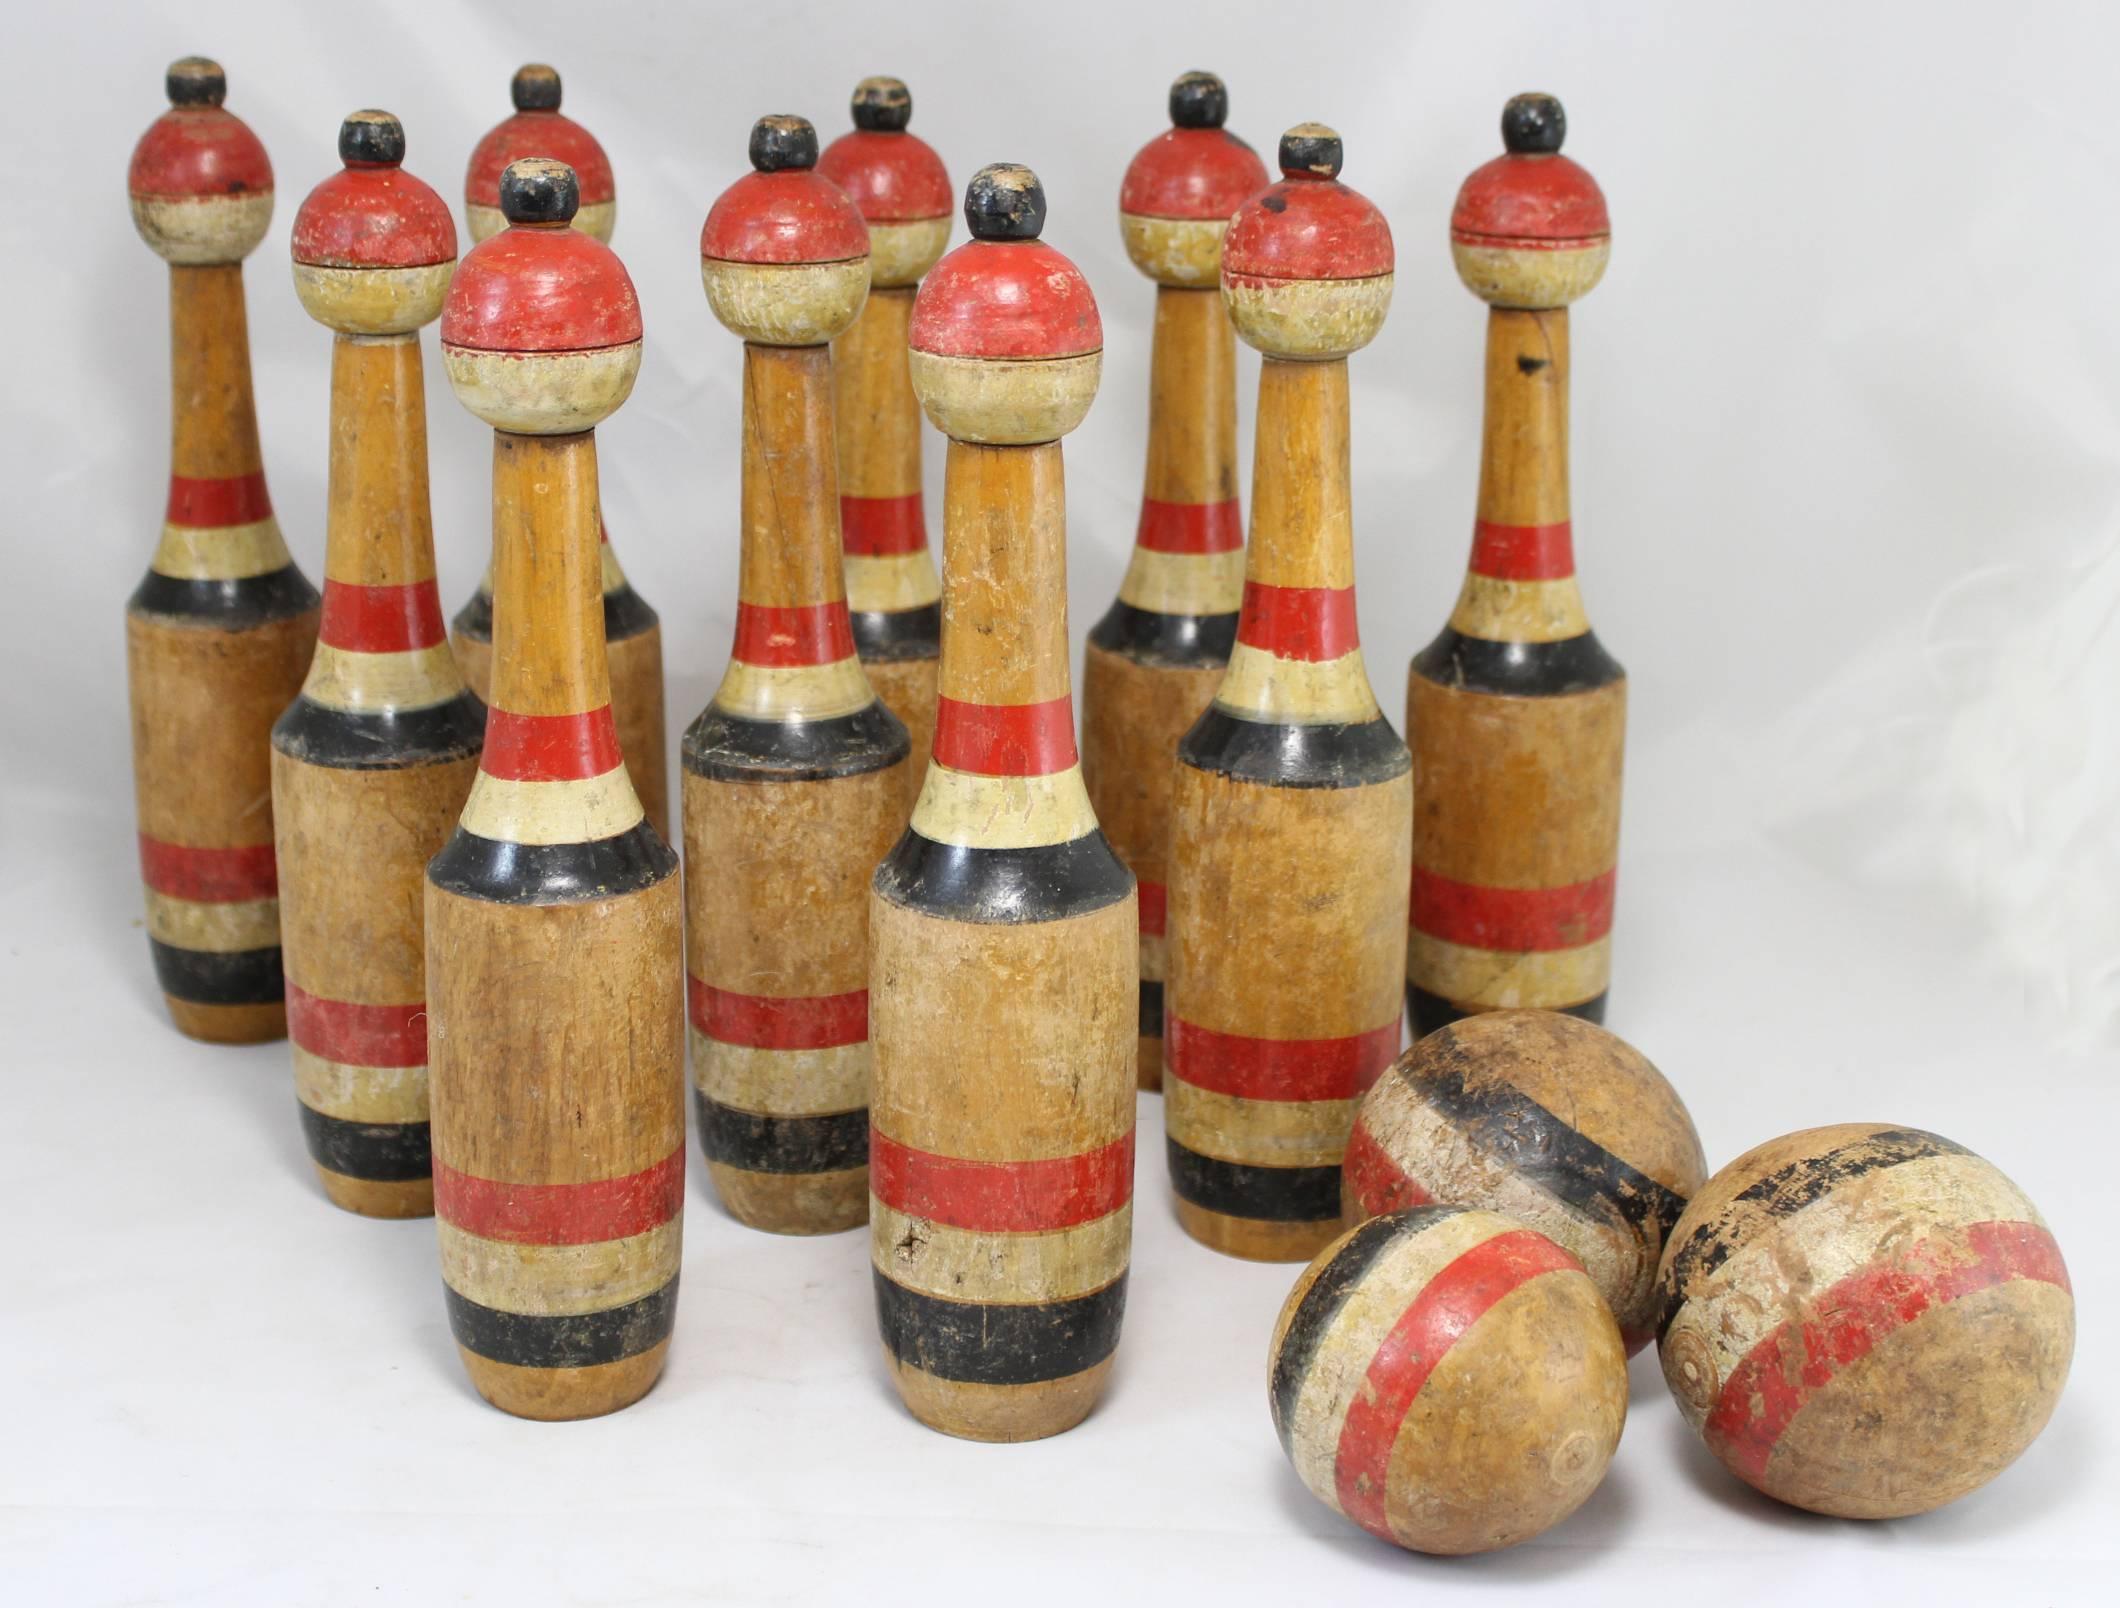 An antique set of ten lawn bowling skittles with three balls, each turned and hand-painted in red, white and deep blue (possibly black) striping. They have great patina, minor imperfections, shrinkage cracks, and expected wear from age and use.